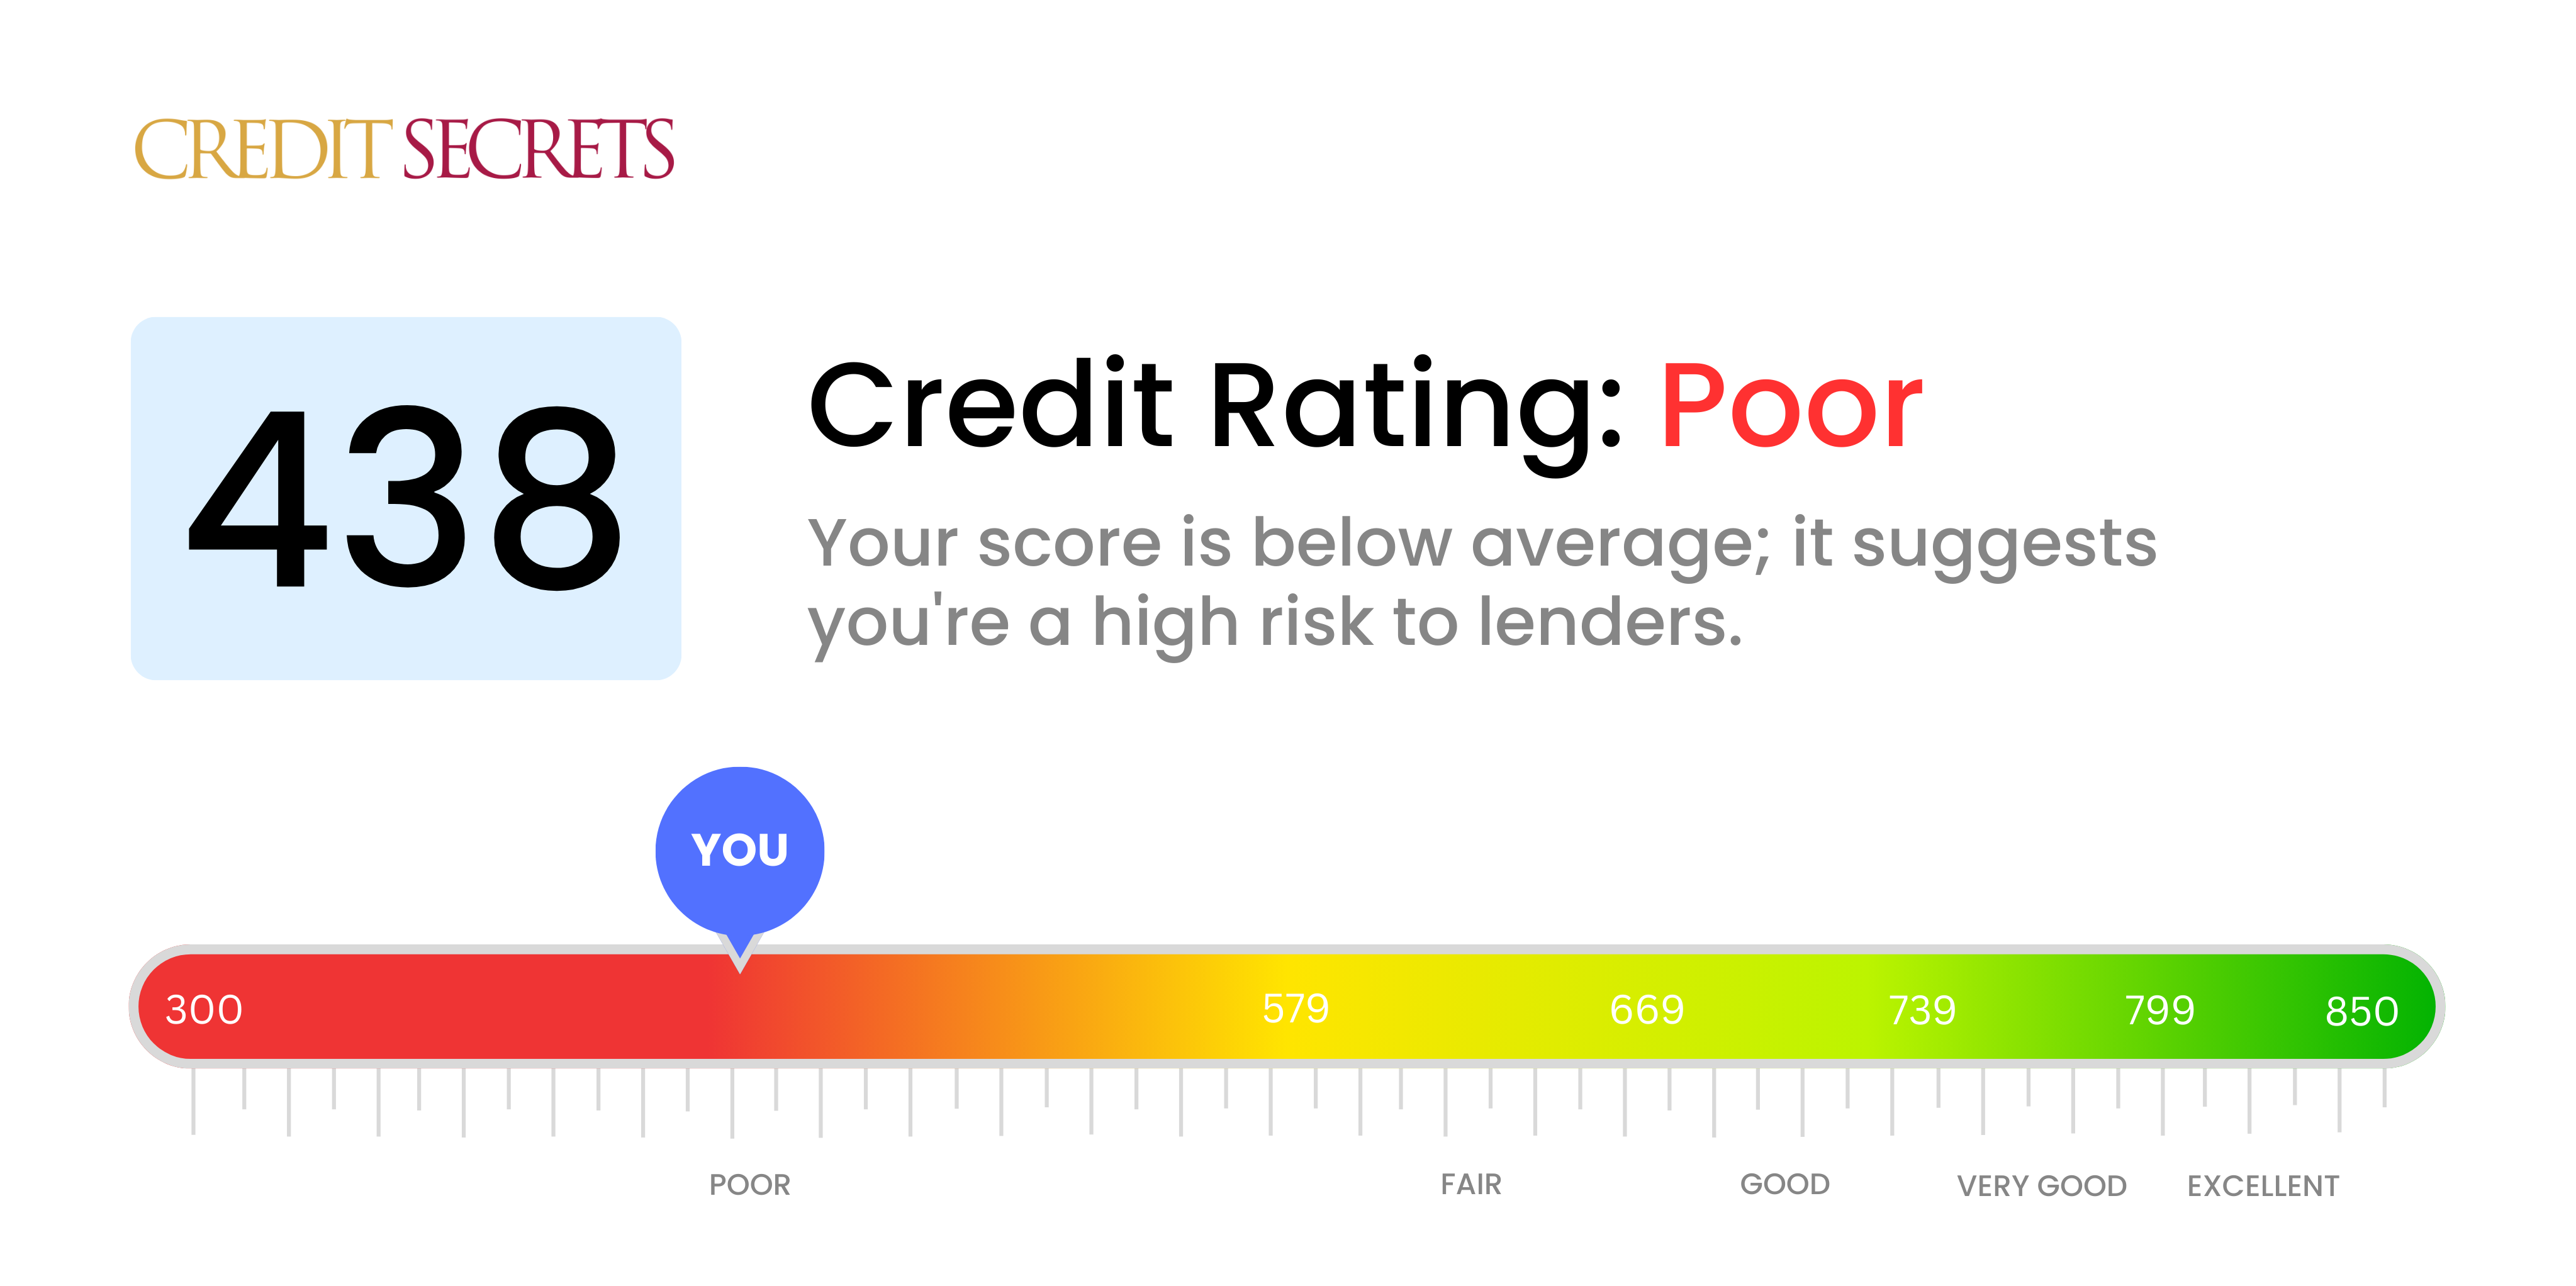 Is 438 a good credit score?